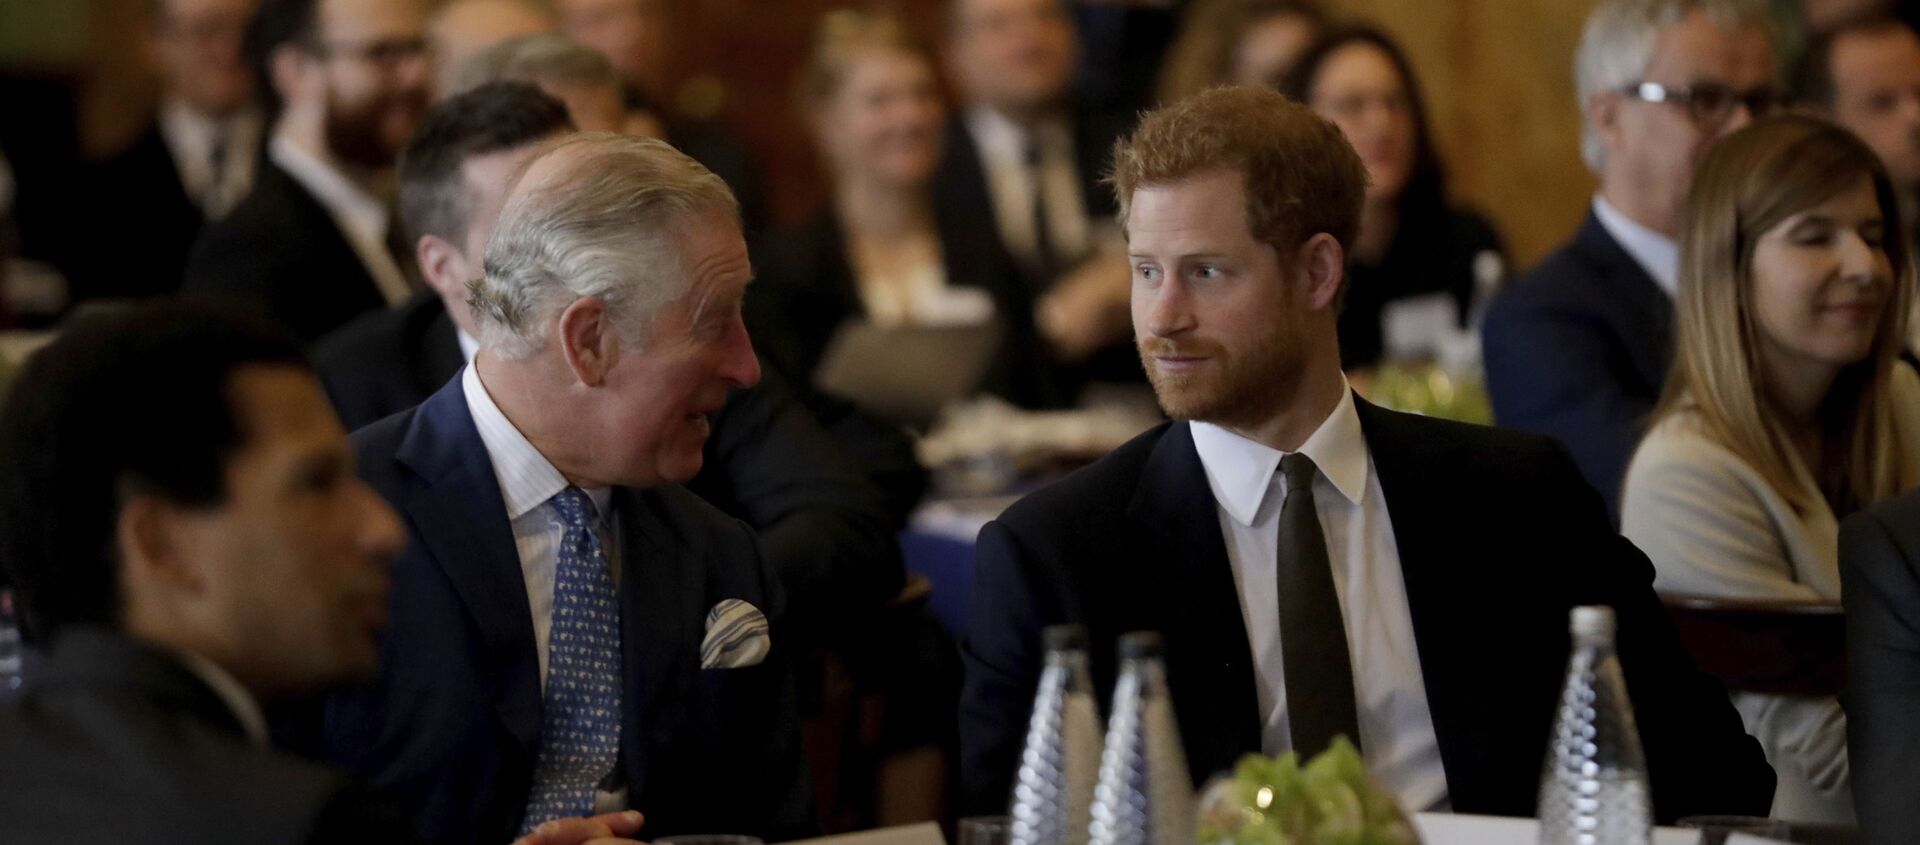 Britain's Prince Harry sits with his father Prince Charles, accompanying him to attend a coral reef health and resilience meeting with speeches and a reception with delegates at Fishmongers Hall in London, Wednesday, Feb. 14, 2018 - Sputnik International, 1920, 10.05.2021